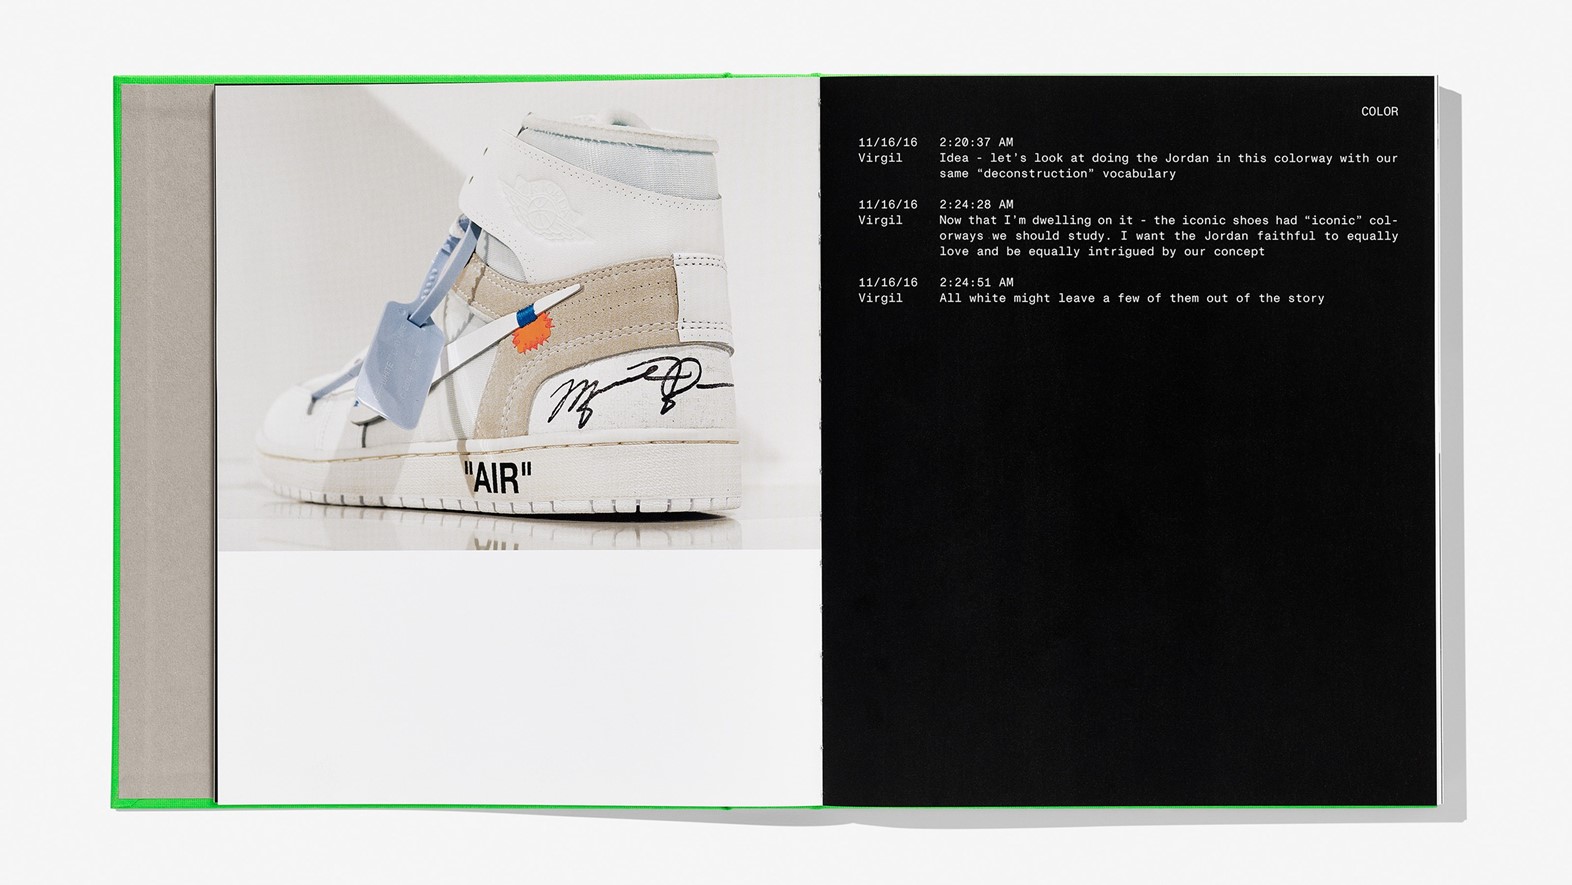 Is 2018 the End of the Virgil Abloh x Nike The 10 Collection?